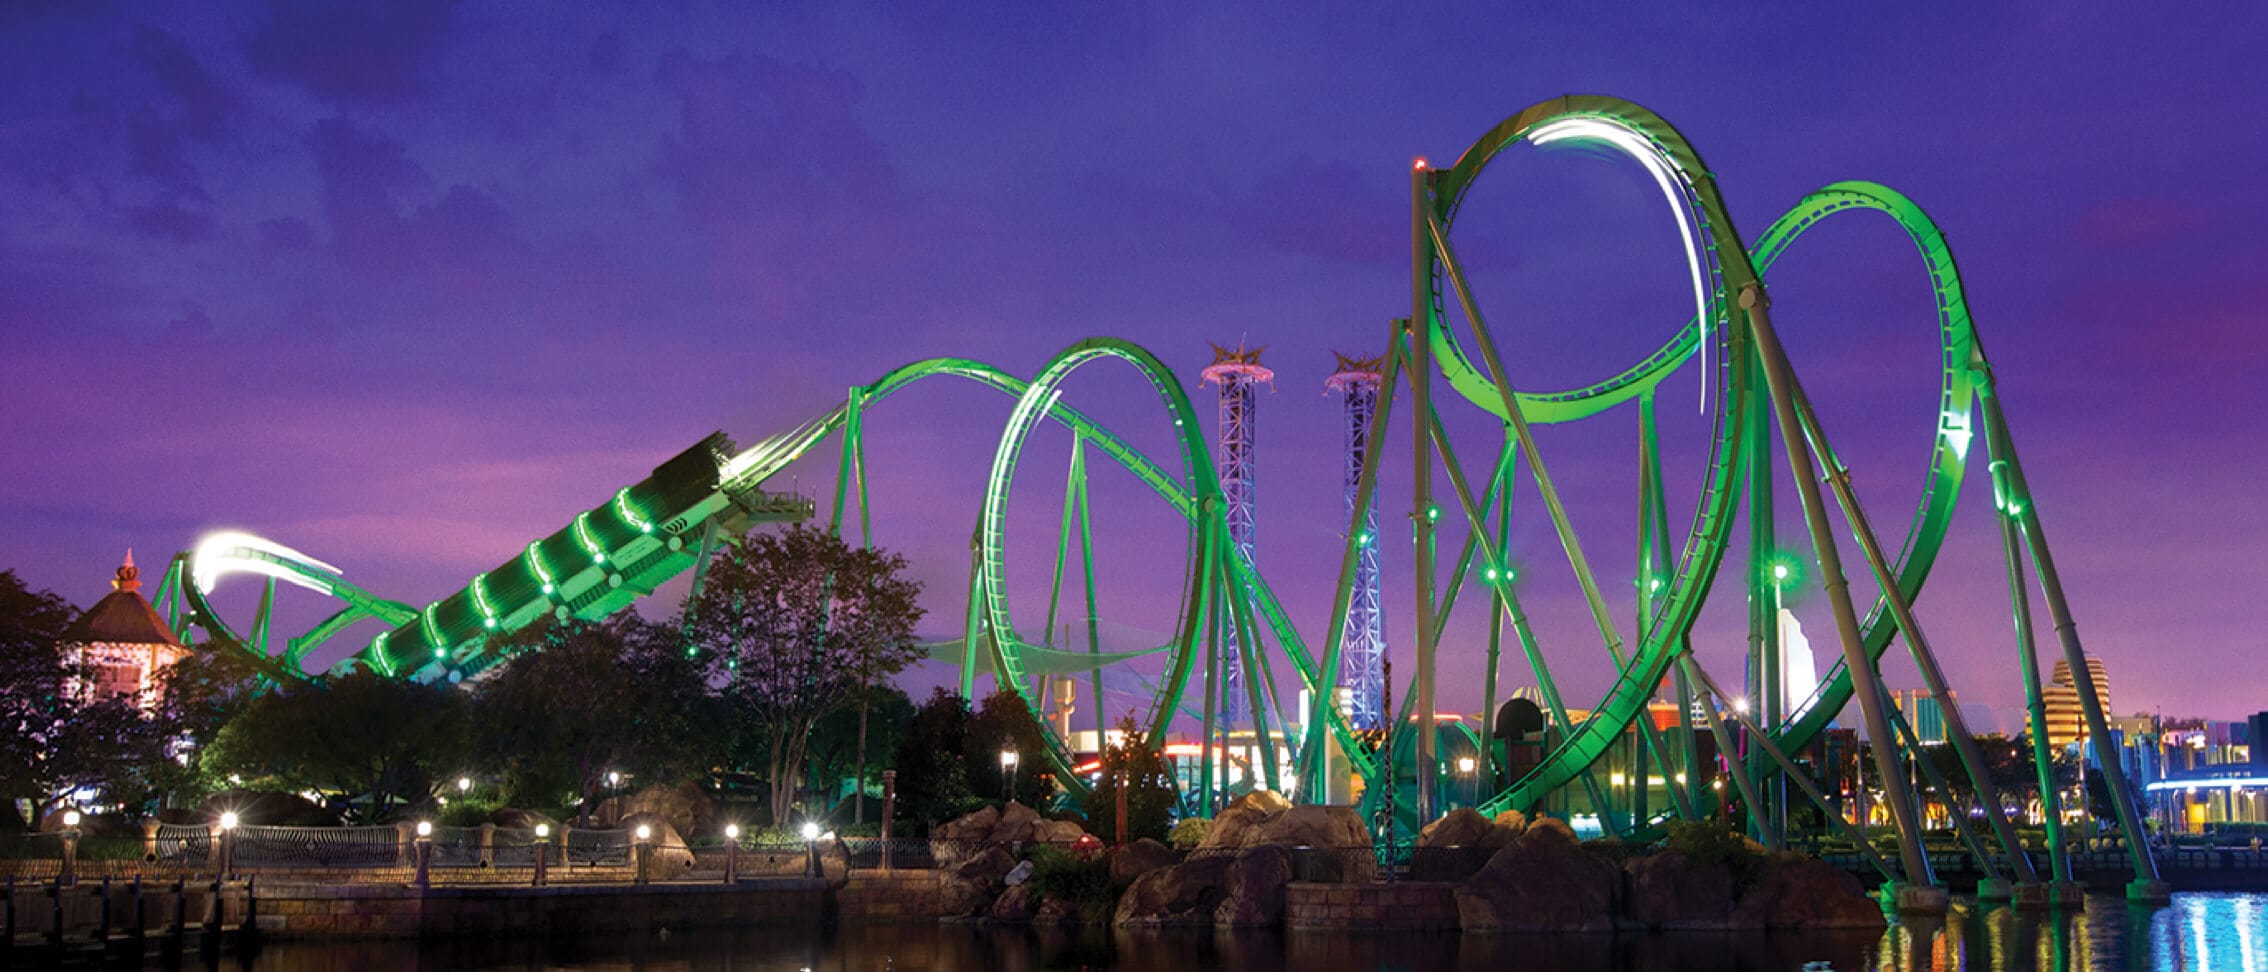 The Incredible Hulk at Islands of Adventure theme park in Orlando, Florida.  best rollercoaster for families and adventure seekers